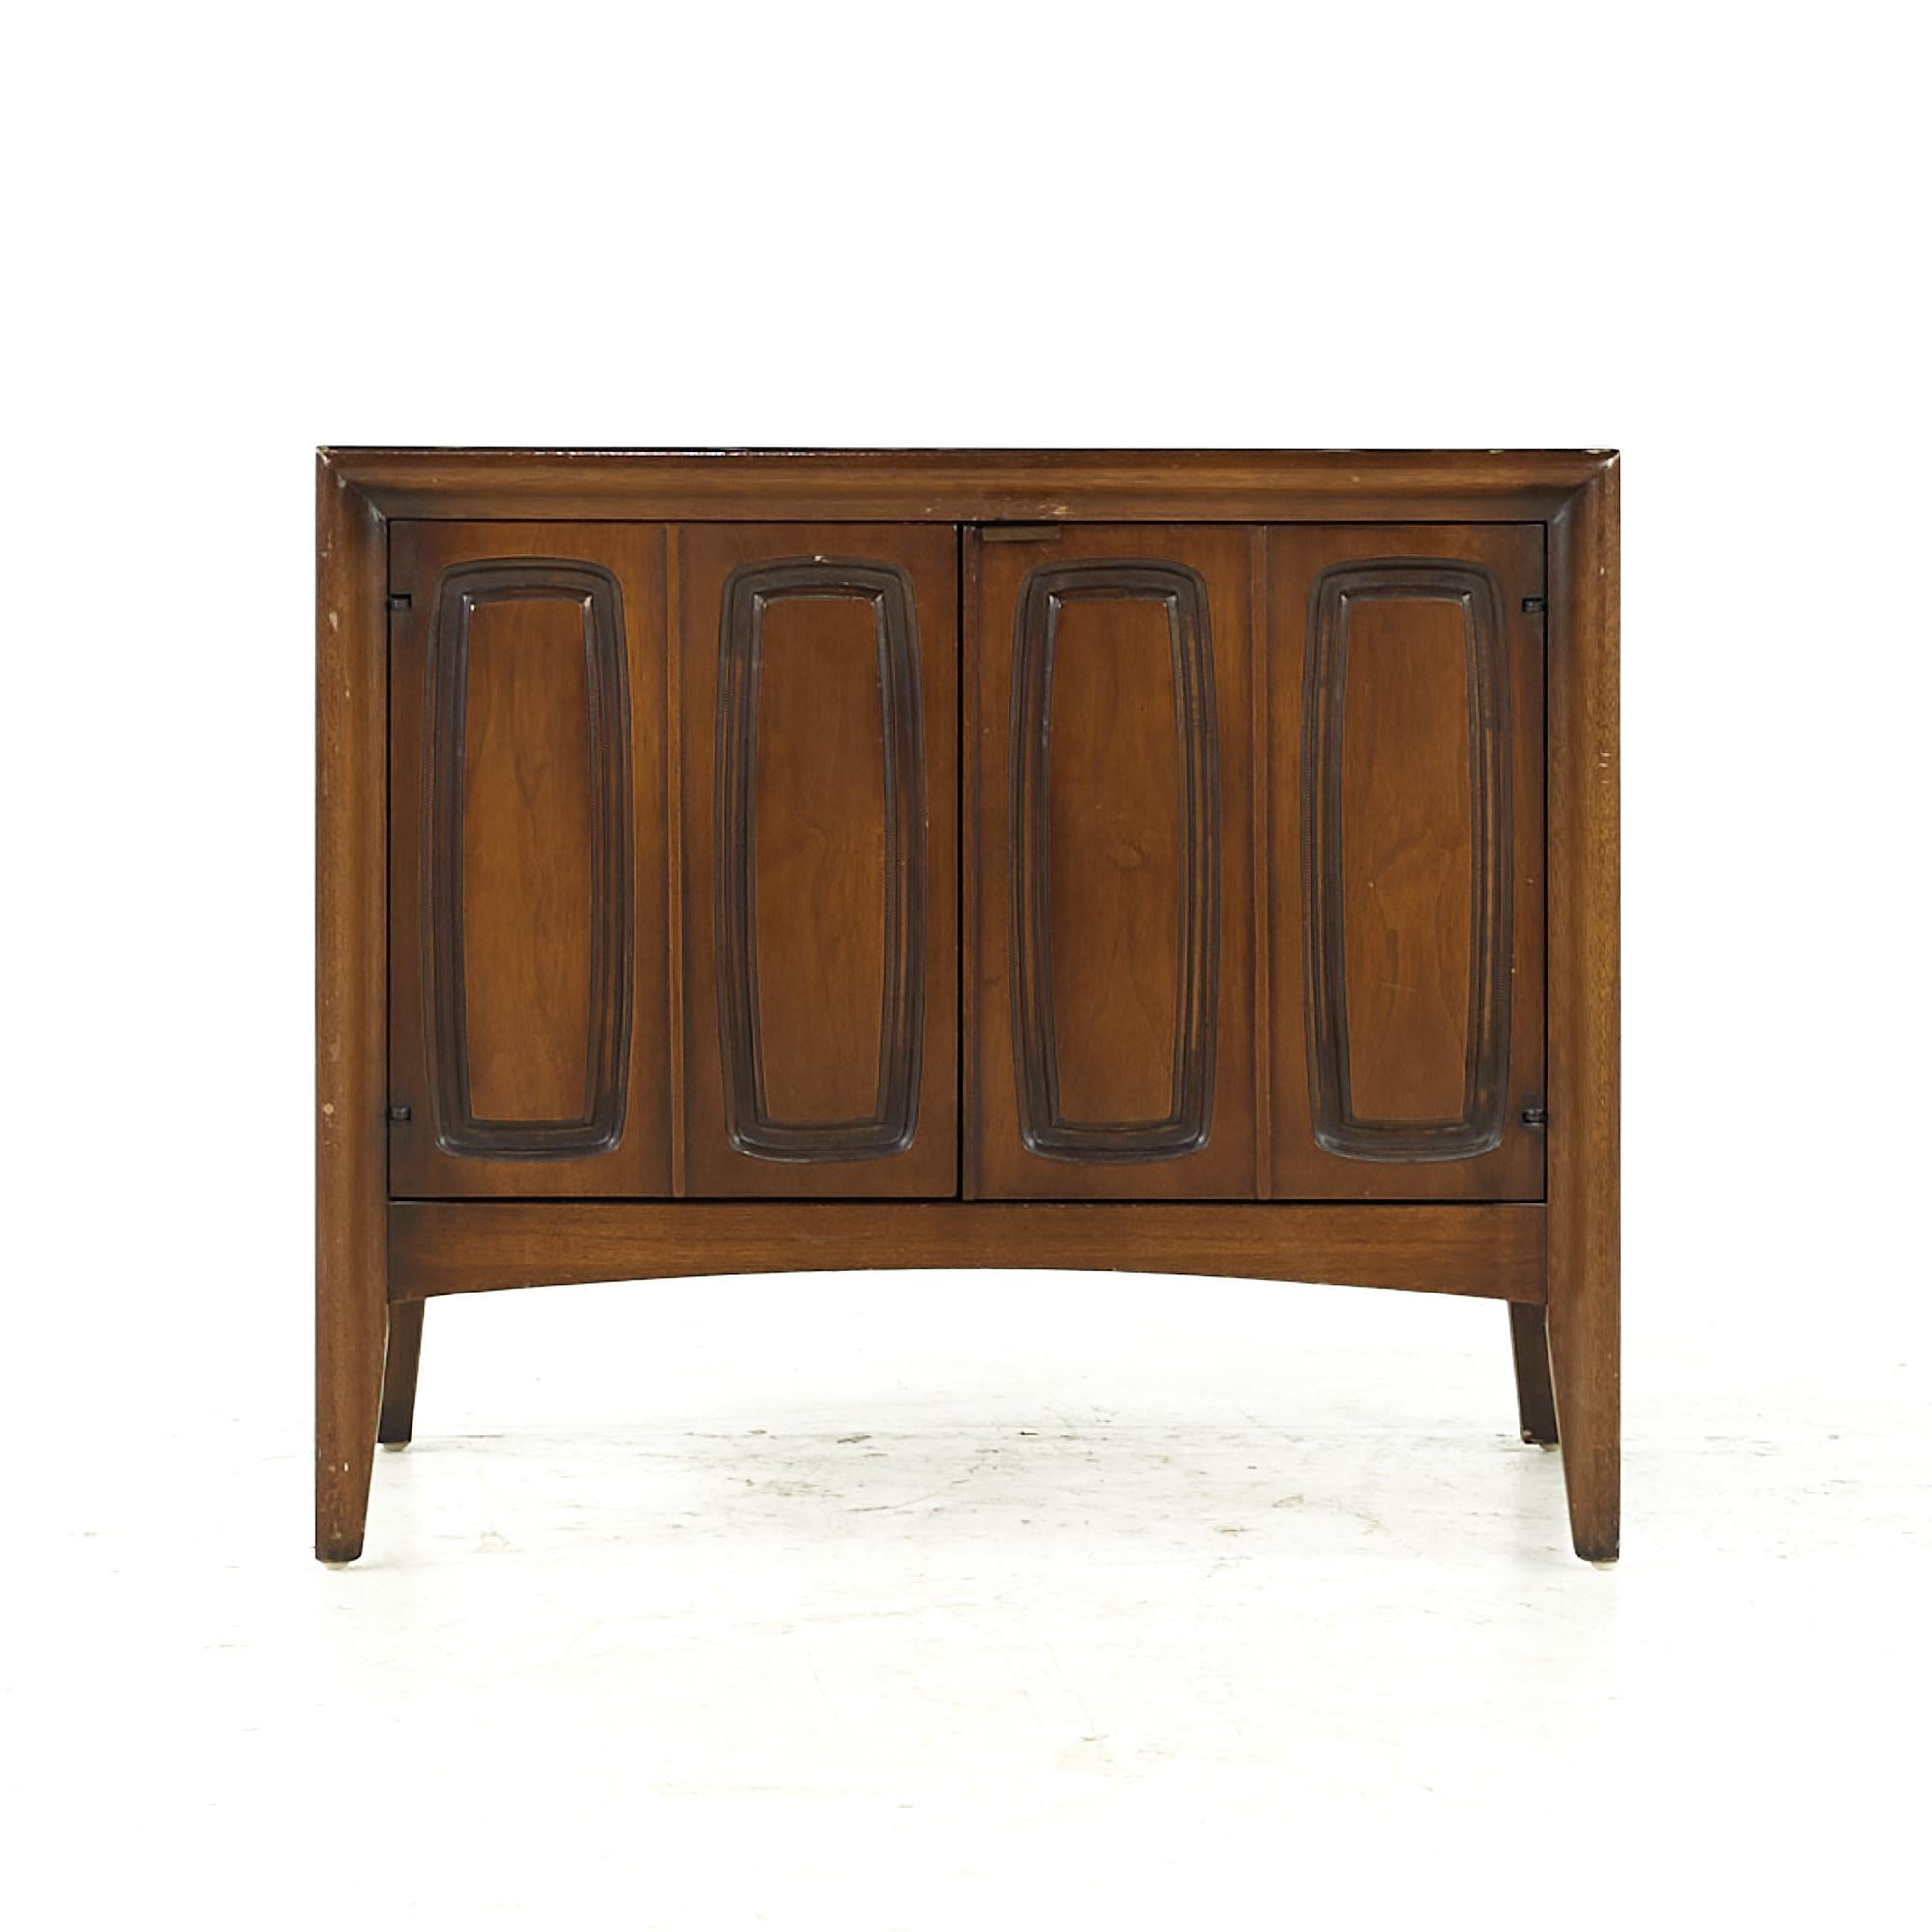 Broyhill Emphasis midcentury walnut nightstand

This nightstand measures: 26 wide x 18 deep x 22.5 inches high

All pieces of furniture can be had in what we call restored vintage condition. That means the piece is restored upon purchase so it’s